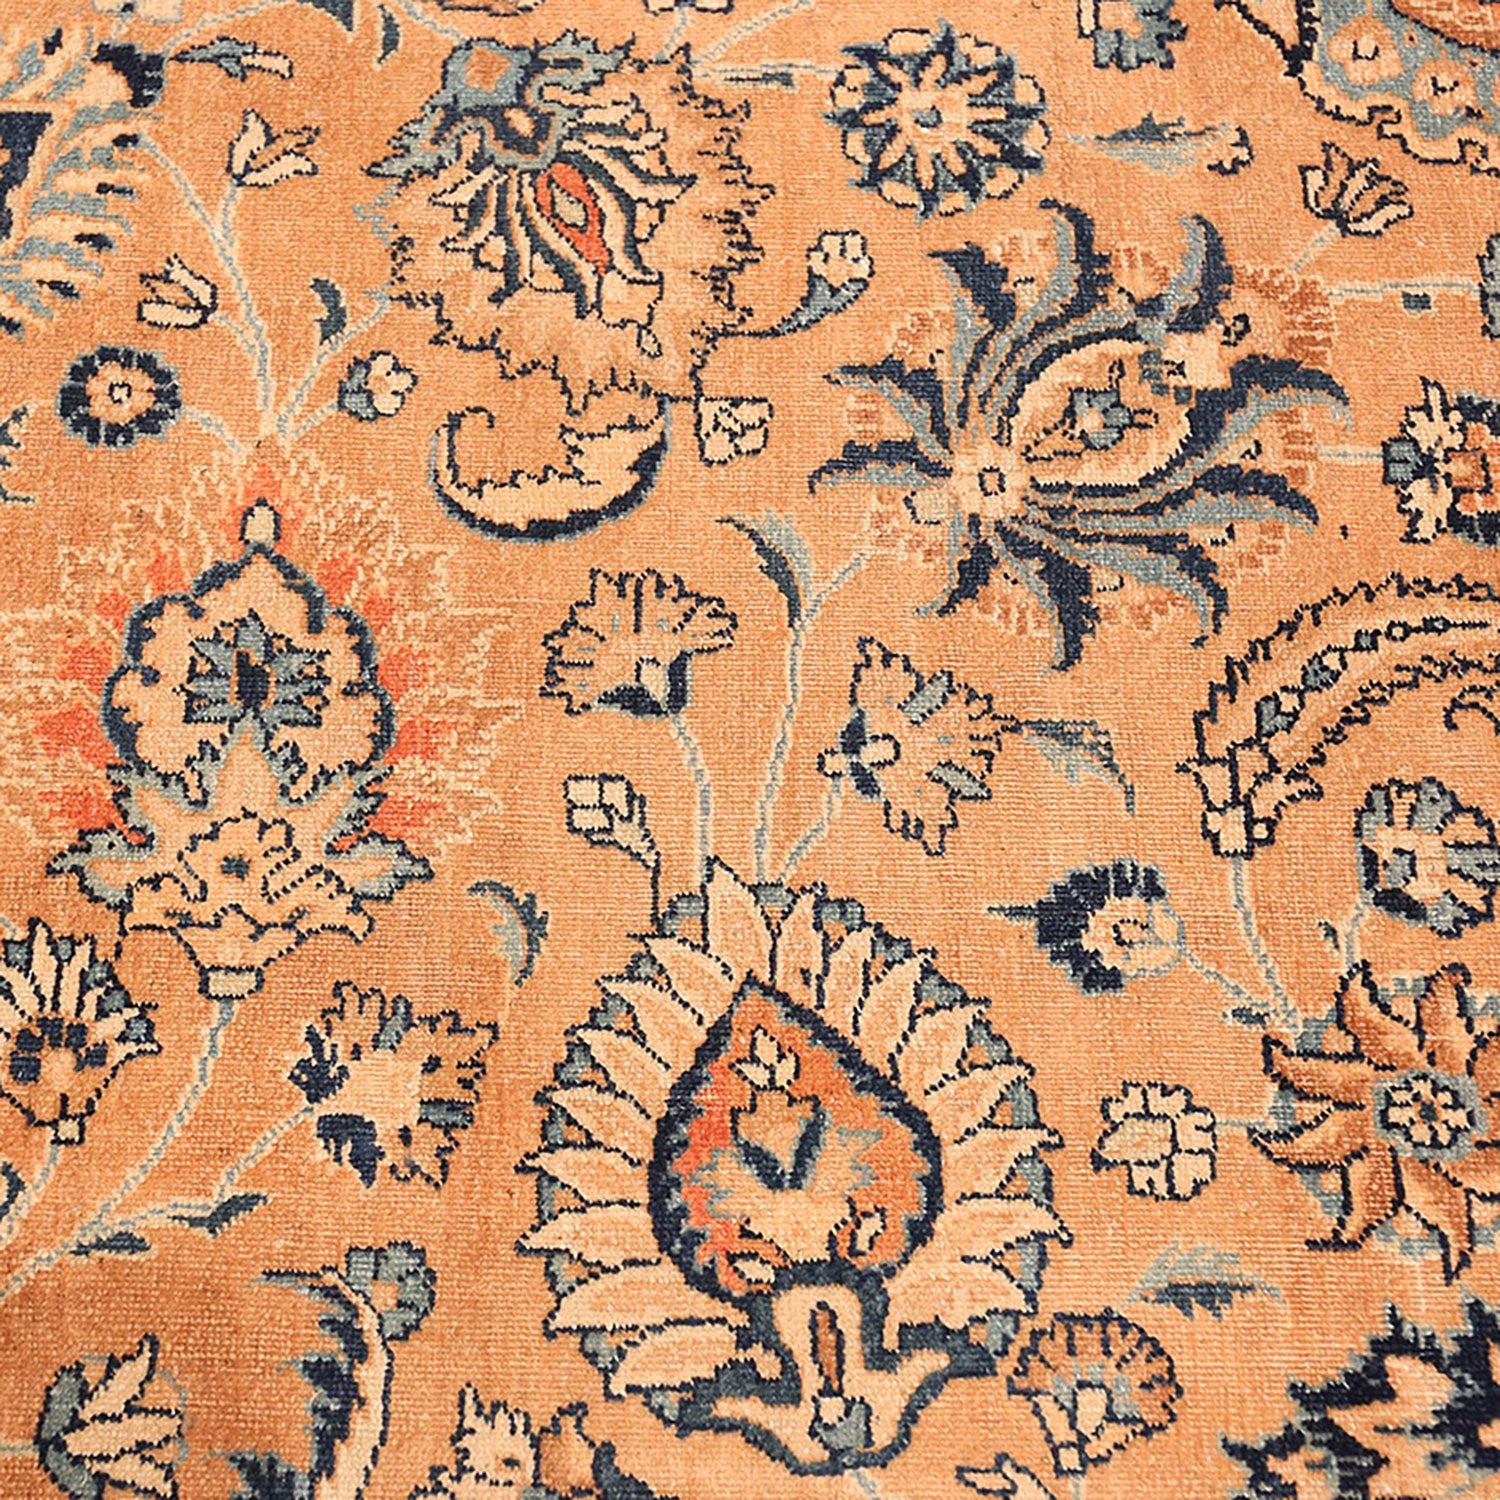 Close-up of worn, antique rug with intricate floral pattern.